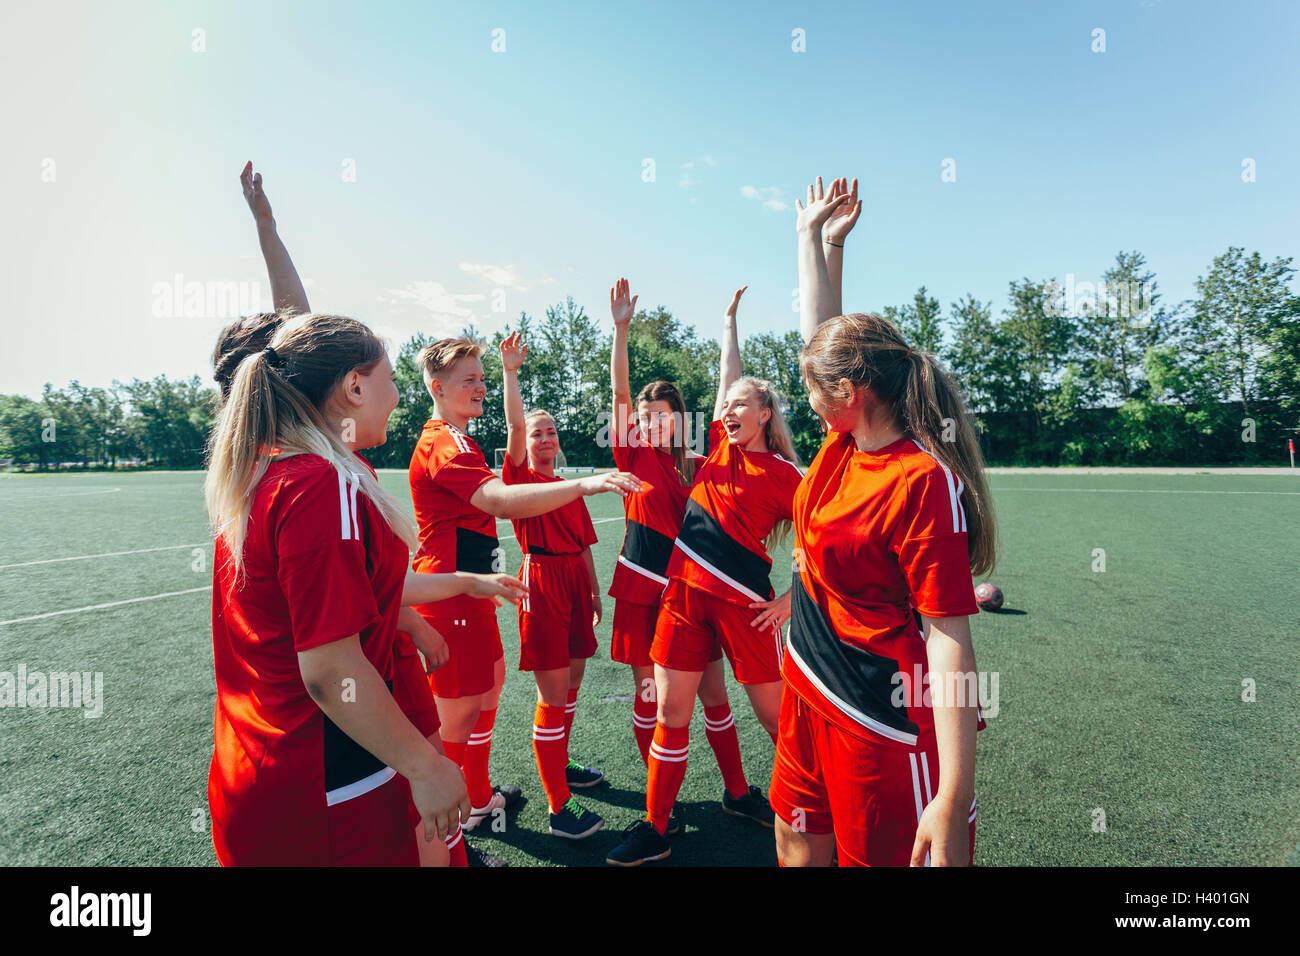 Excited soccer players with hands raised standing on field Stock Photo